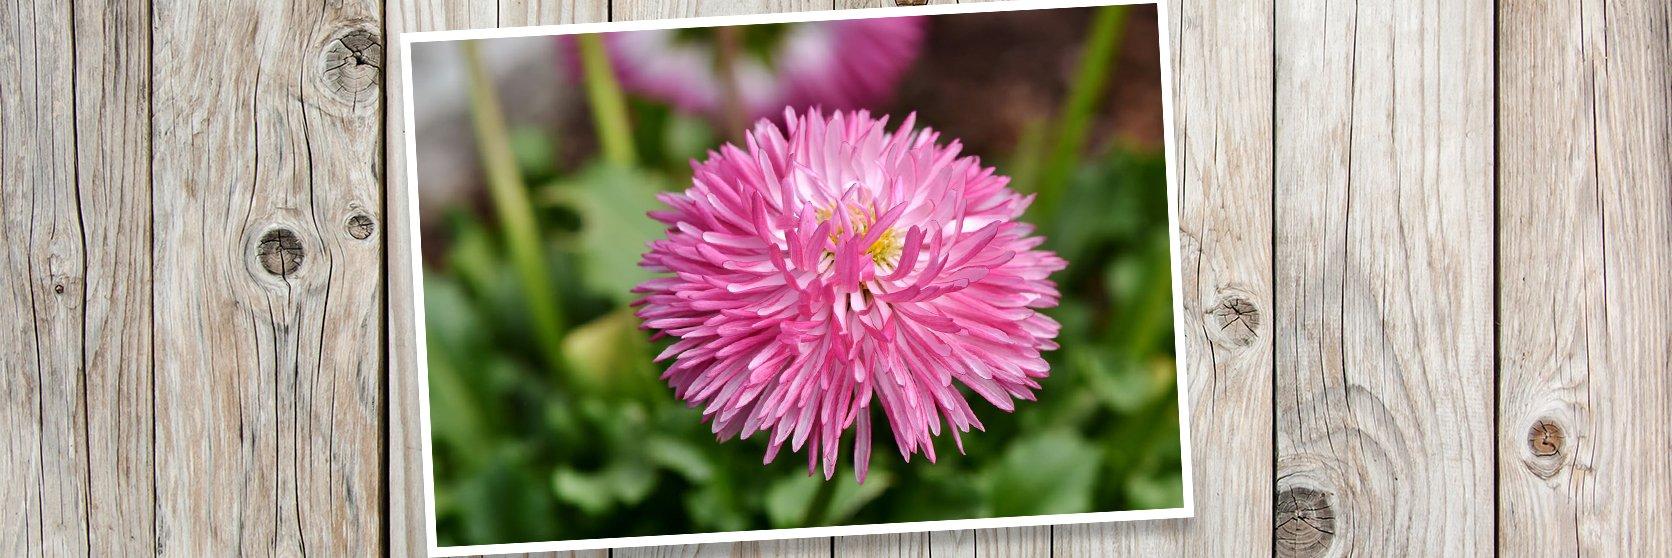 China-Aster-Flower-Blossom-PLANK